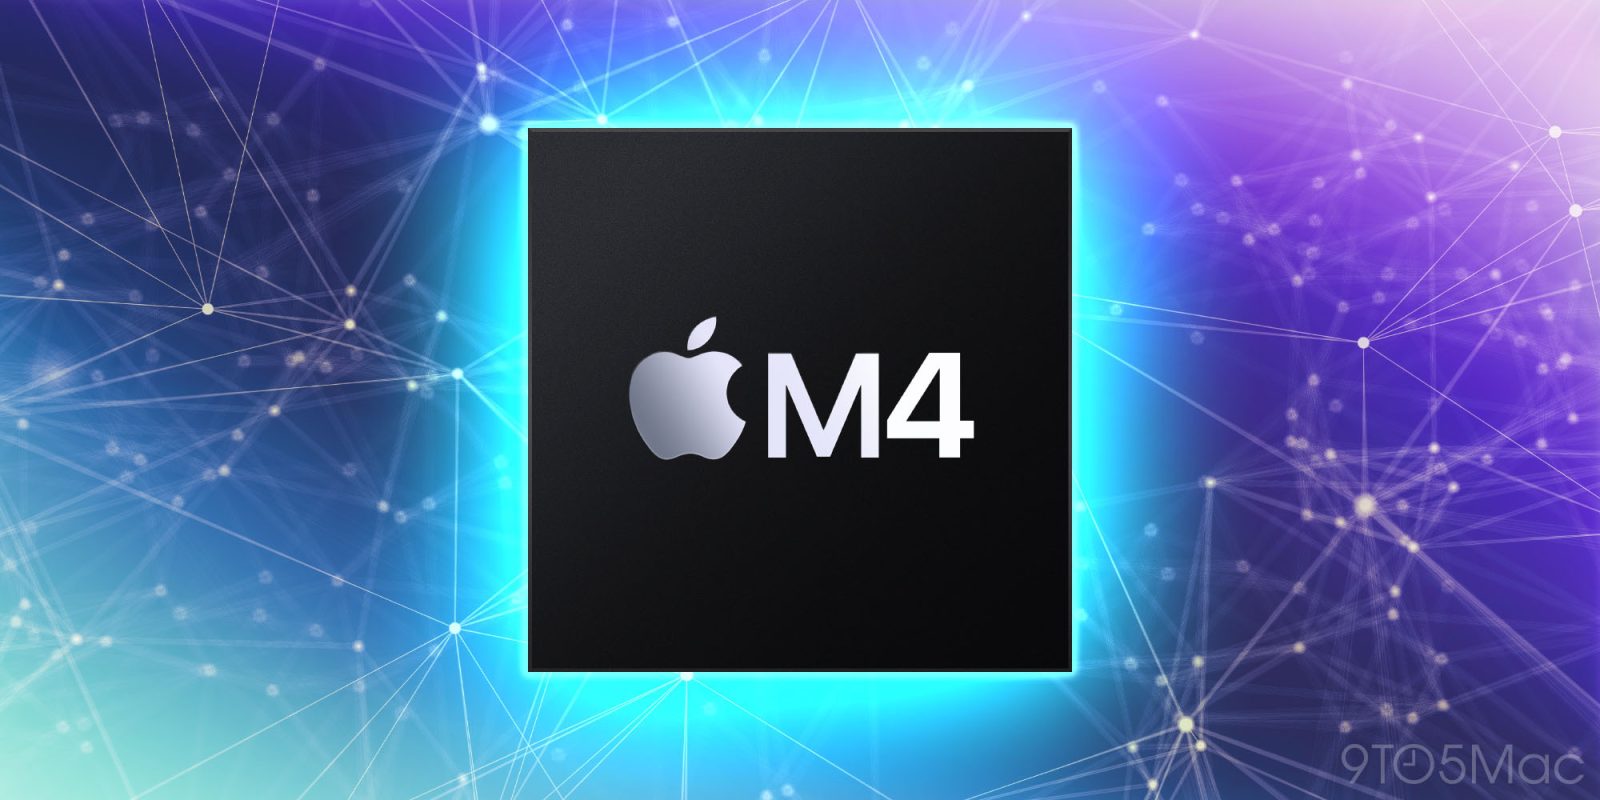 Apple aiming to release first M4-powered Macs this year with a focus on AI - 9to5Mac